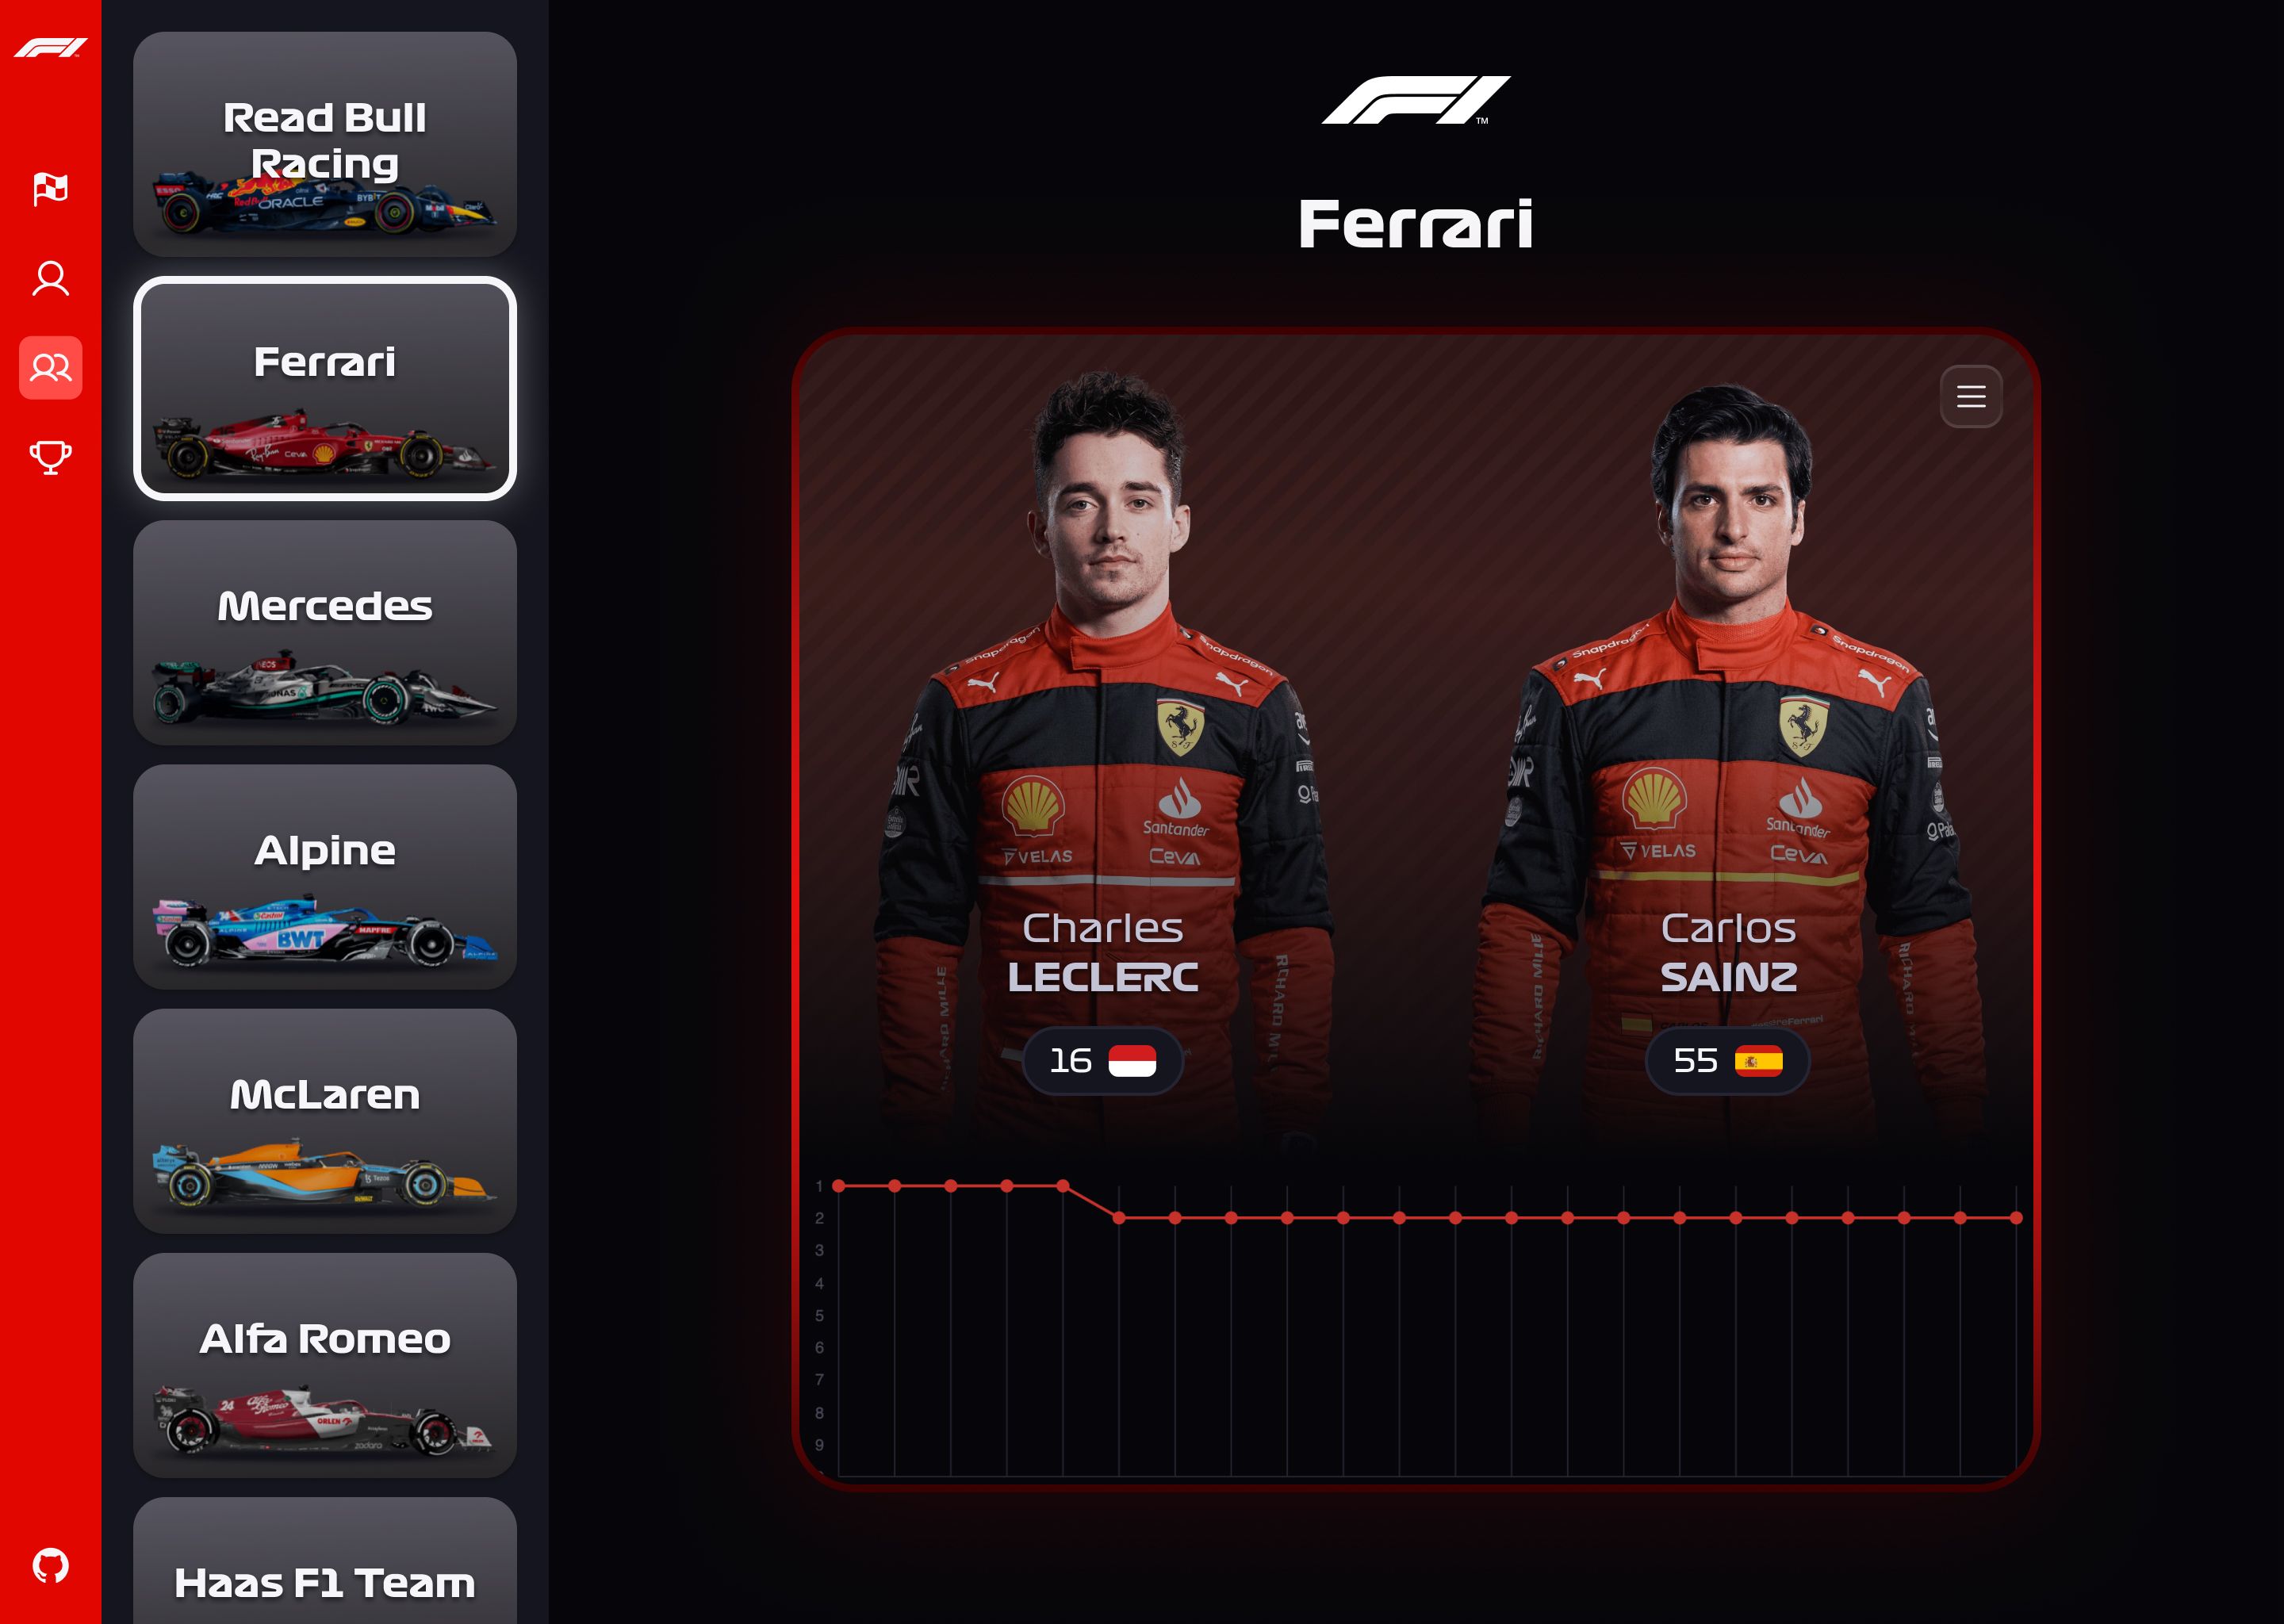 Teams page of F1 Insights, with a sidebar on the left containing the list of teams and on the right the image of the team drivers, along with the team data